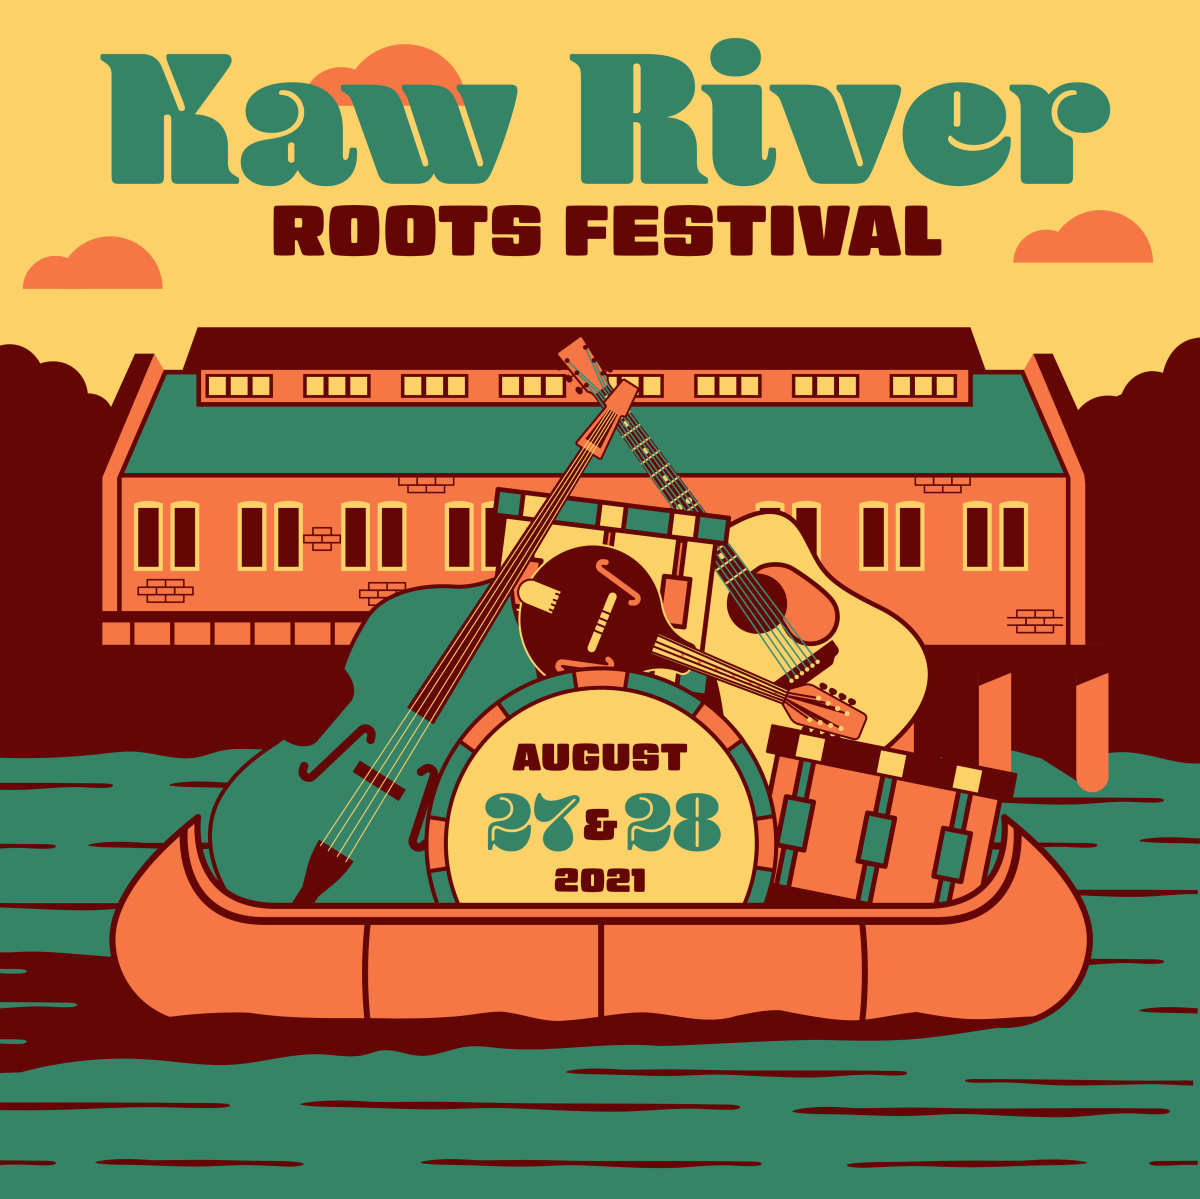 Kaw River Roots Festival in Lawrence, Kansas